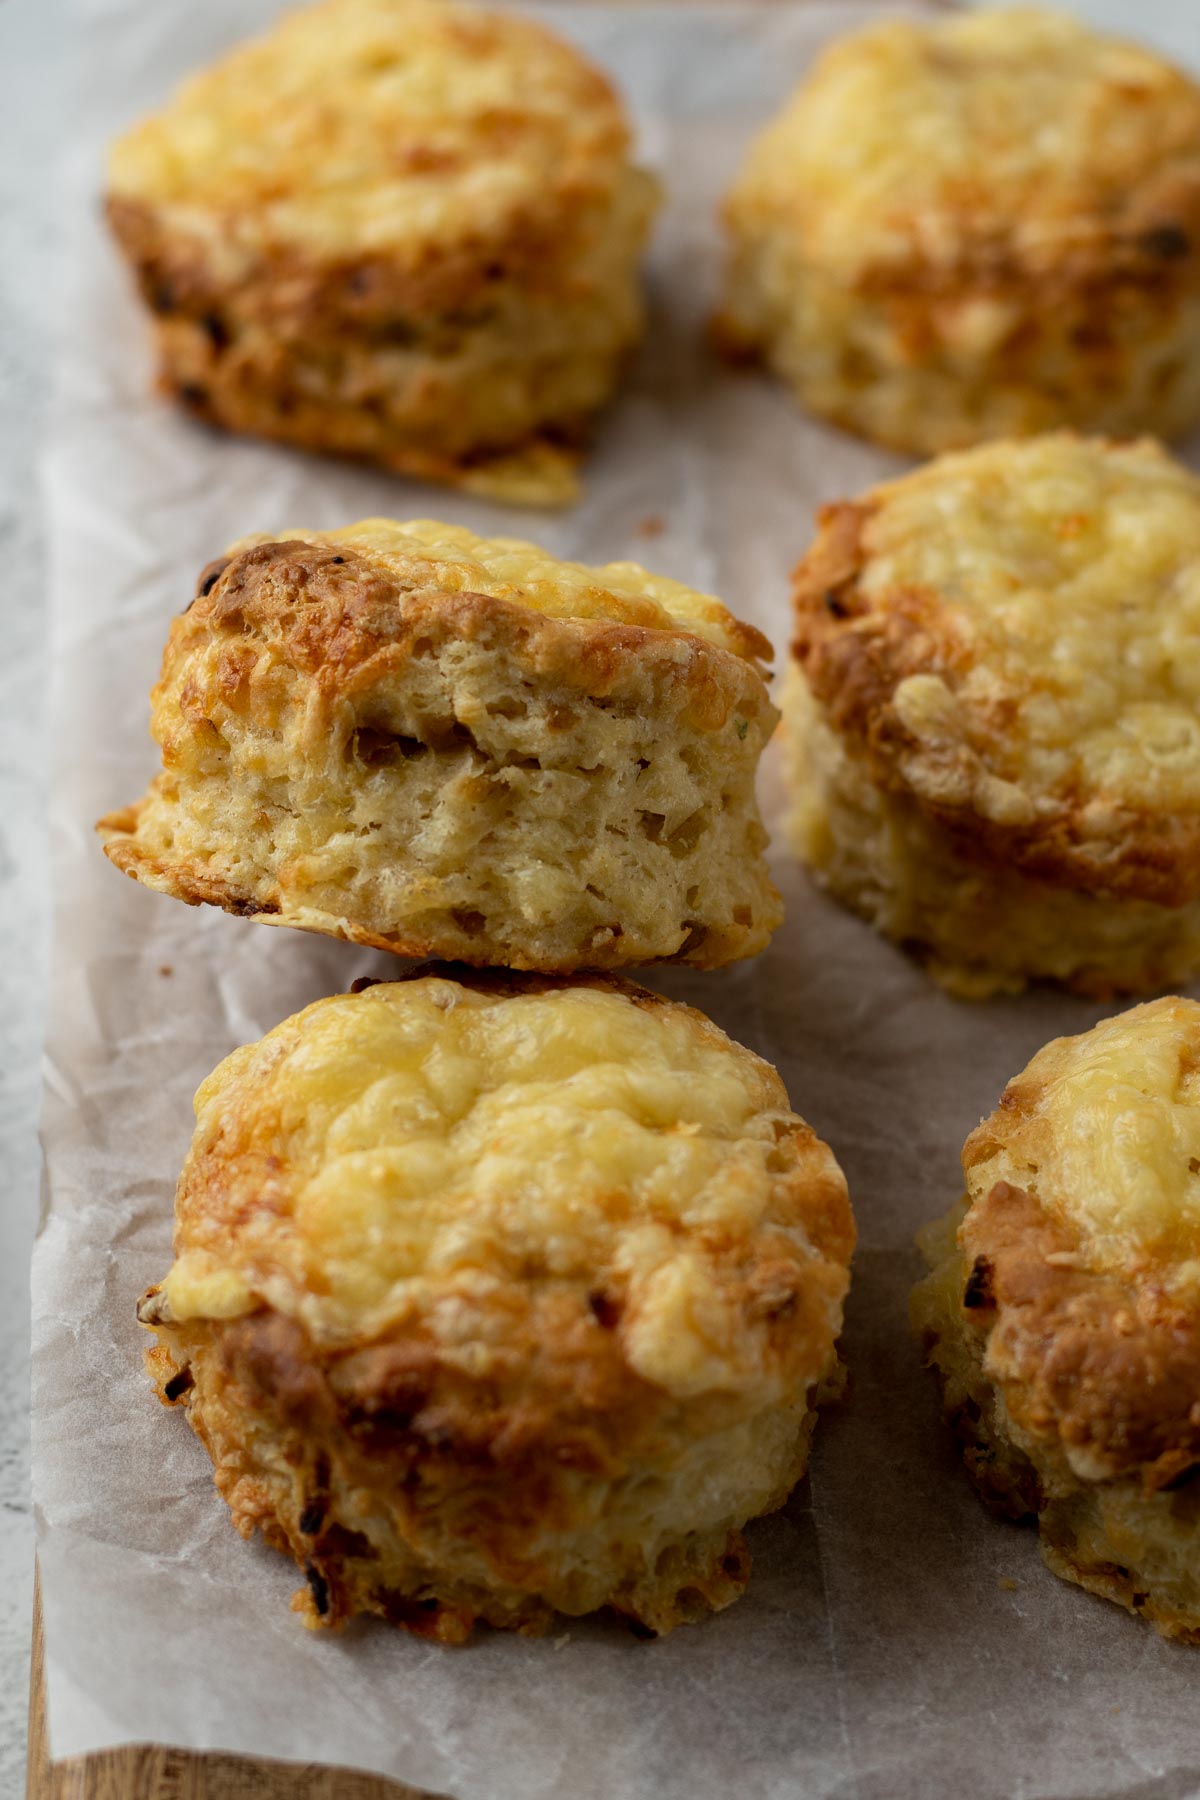 Close up of a cheese and onion scone showing layers.